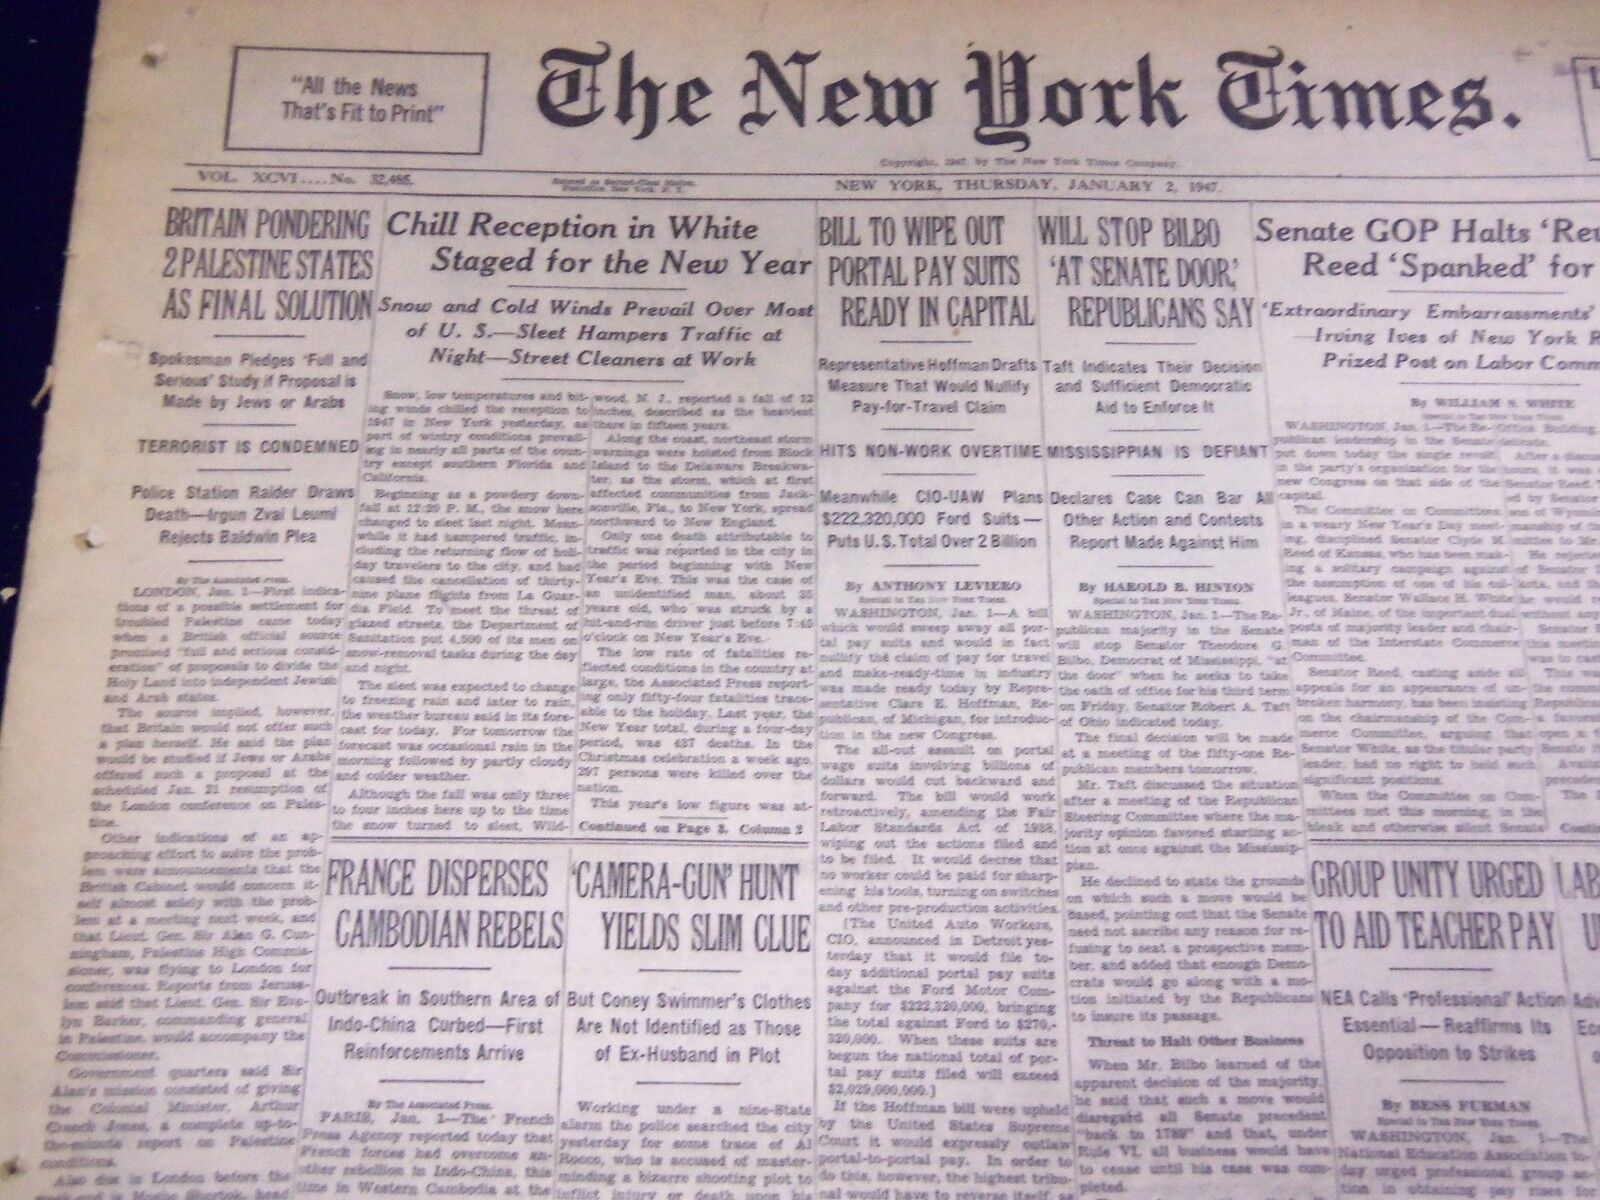 1947 JANUARY 2 NEW YORK TIMES - 2 PALESTINE STATES CONSIDERED - NT 3431